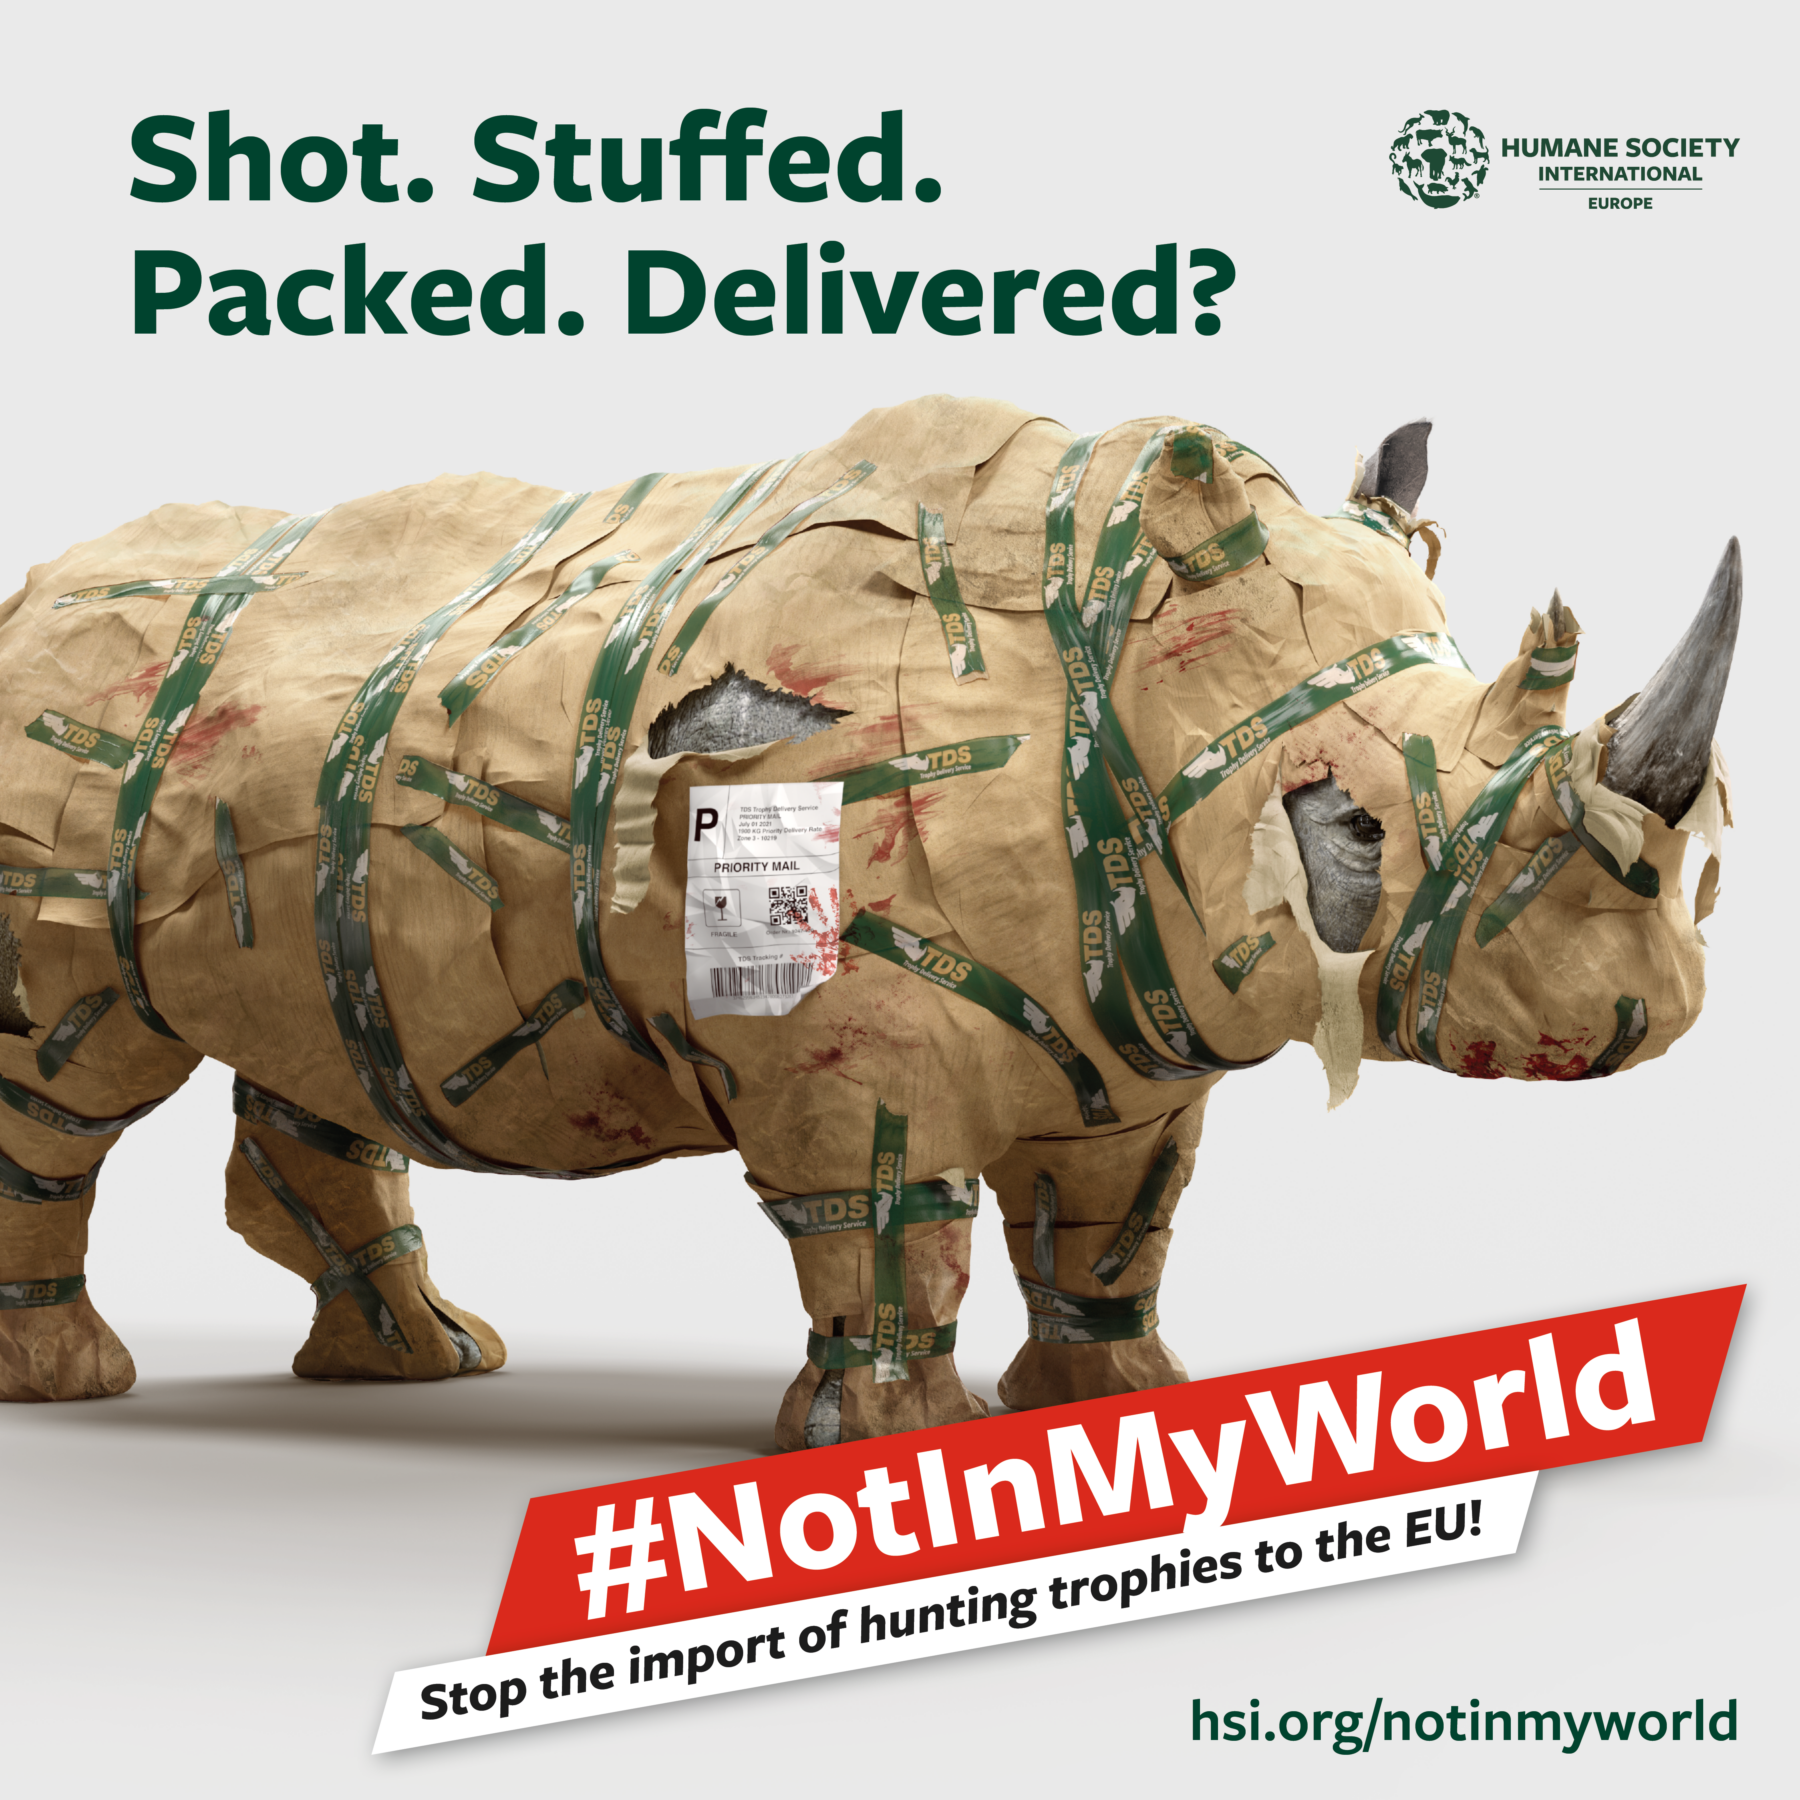 Images of bloodied dead rhinoceros shot, stuffed and delivered to the EU  appear in hard-hitting campaign to ban hunting trophy imports - Humane  Society International